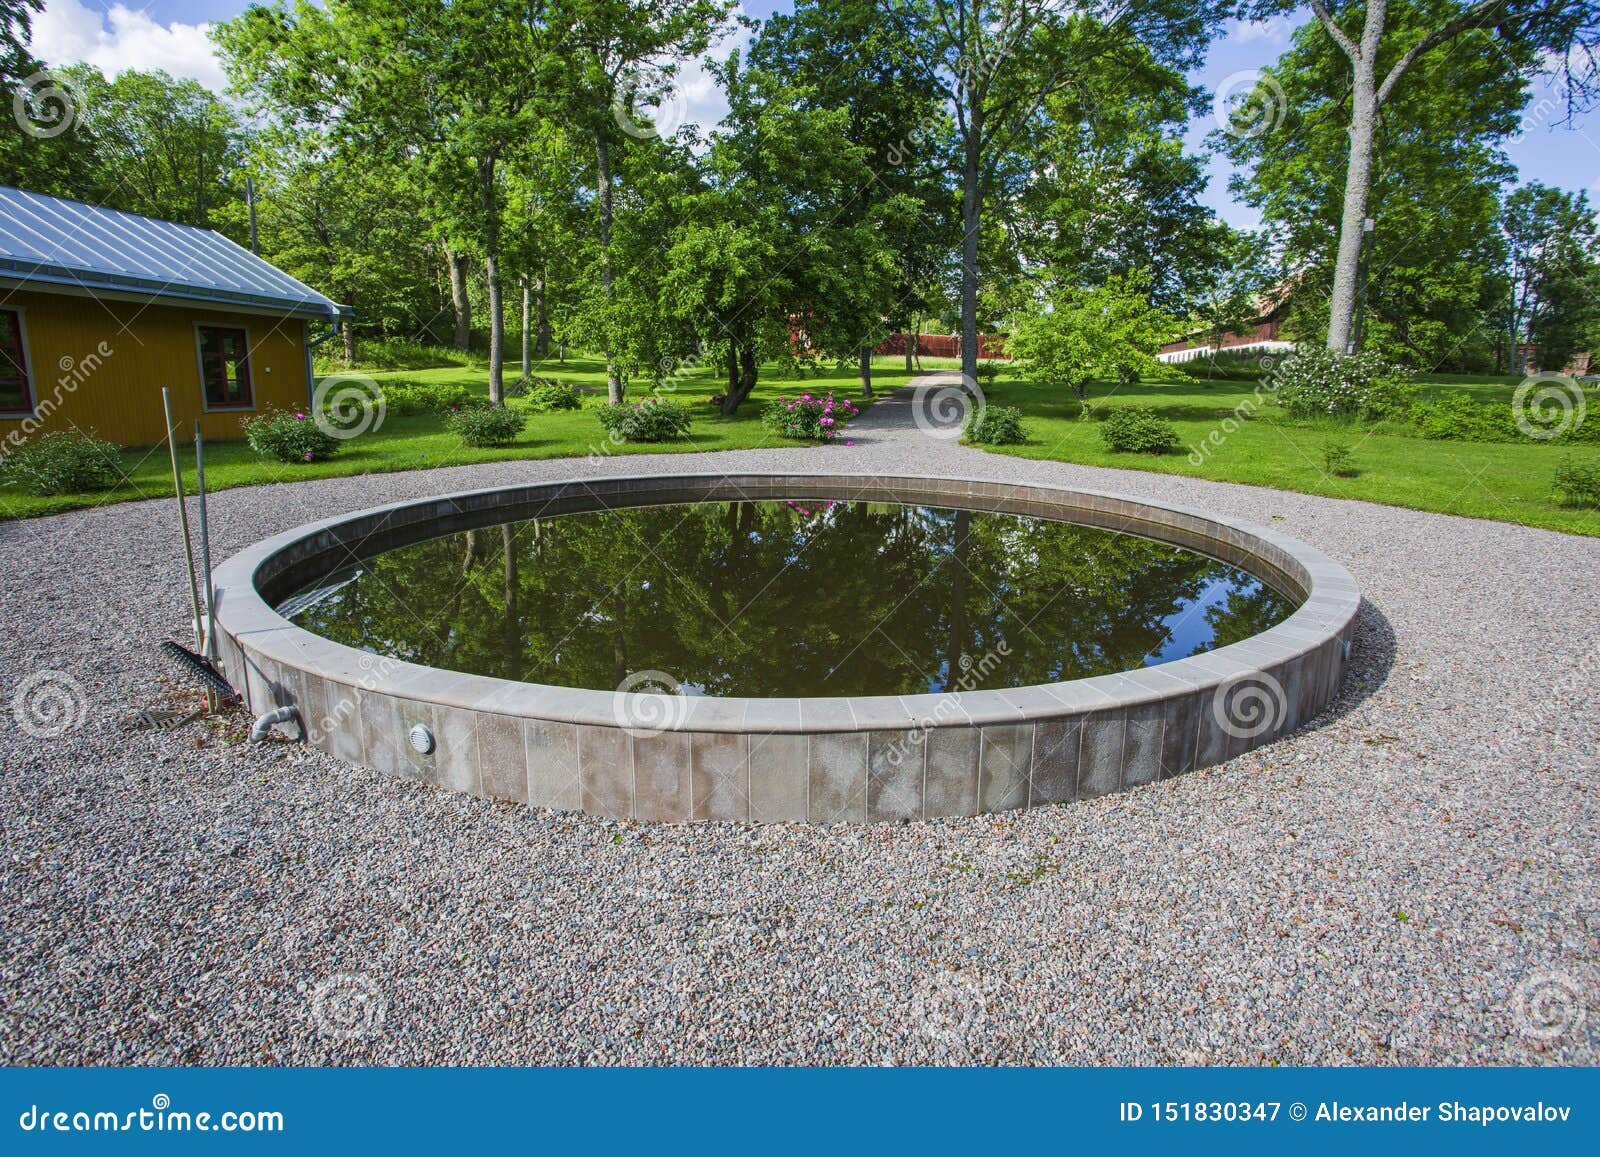 Beautiful View of Round Decorative Outdoor Fish Pond on Green Trees  Background. Outdoor Landscape Design Concept Stock Image - Image of tree,  round: 151830347